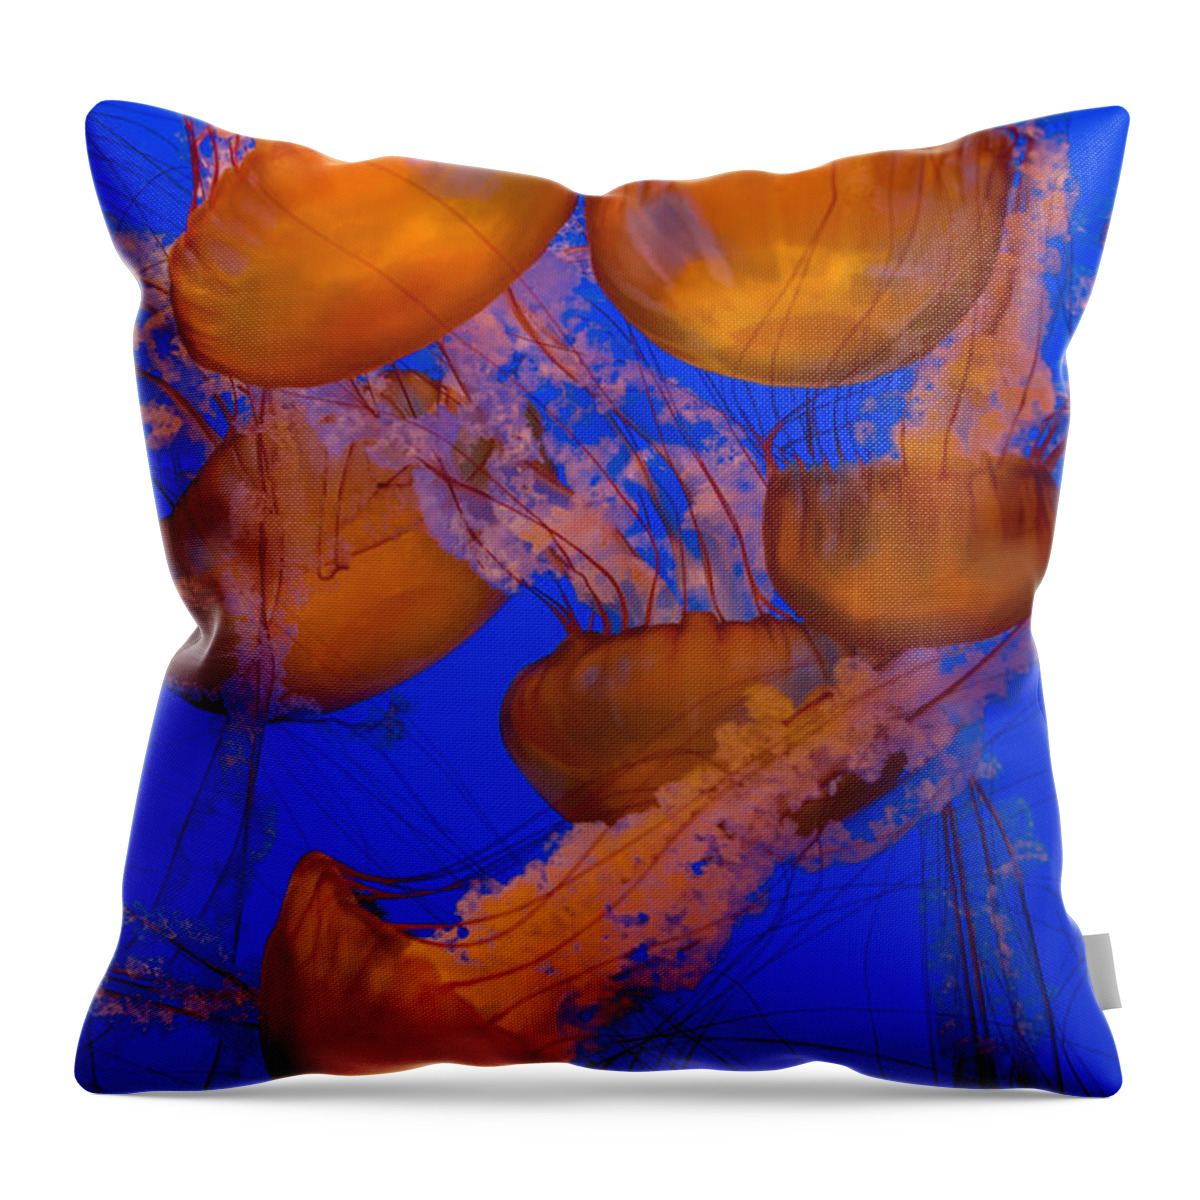 Jellyfish Throw Pillow featuring the photograph Pacific Sea Nettle Cluster 2 by Scott Campbell